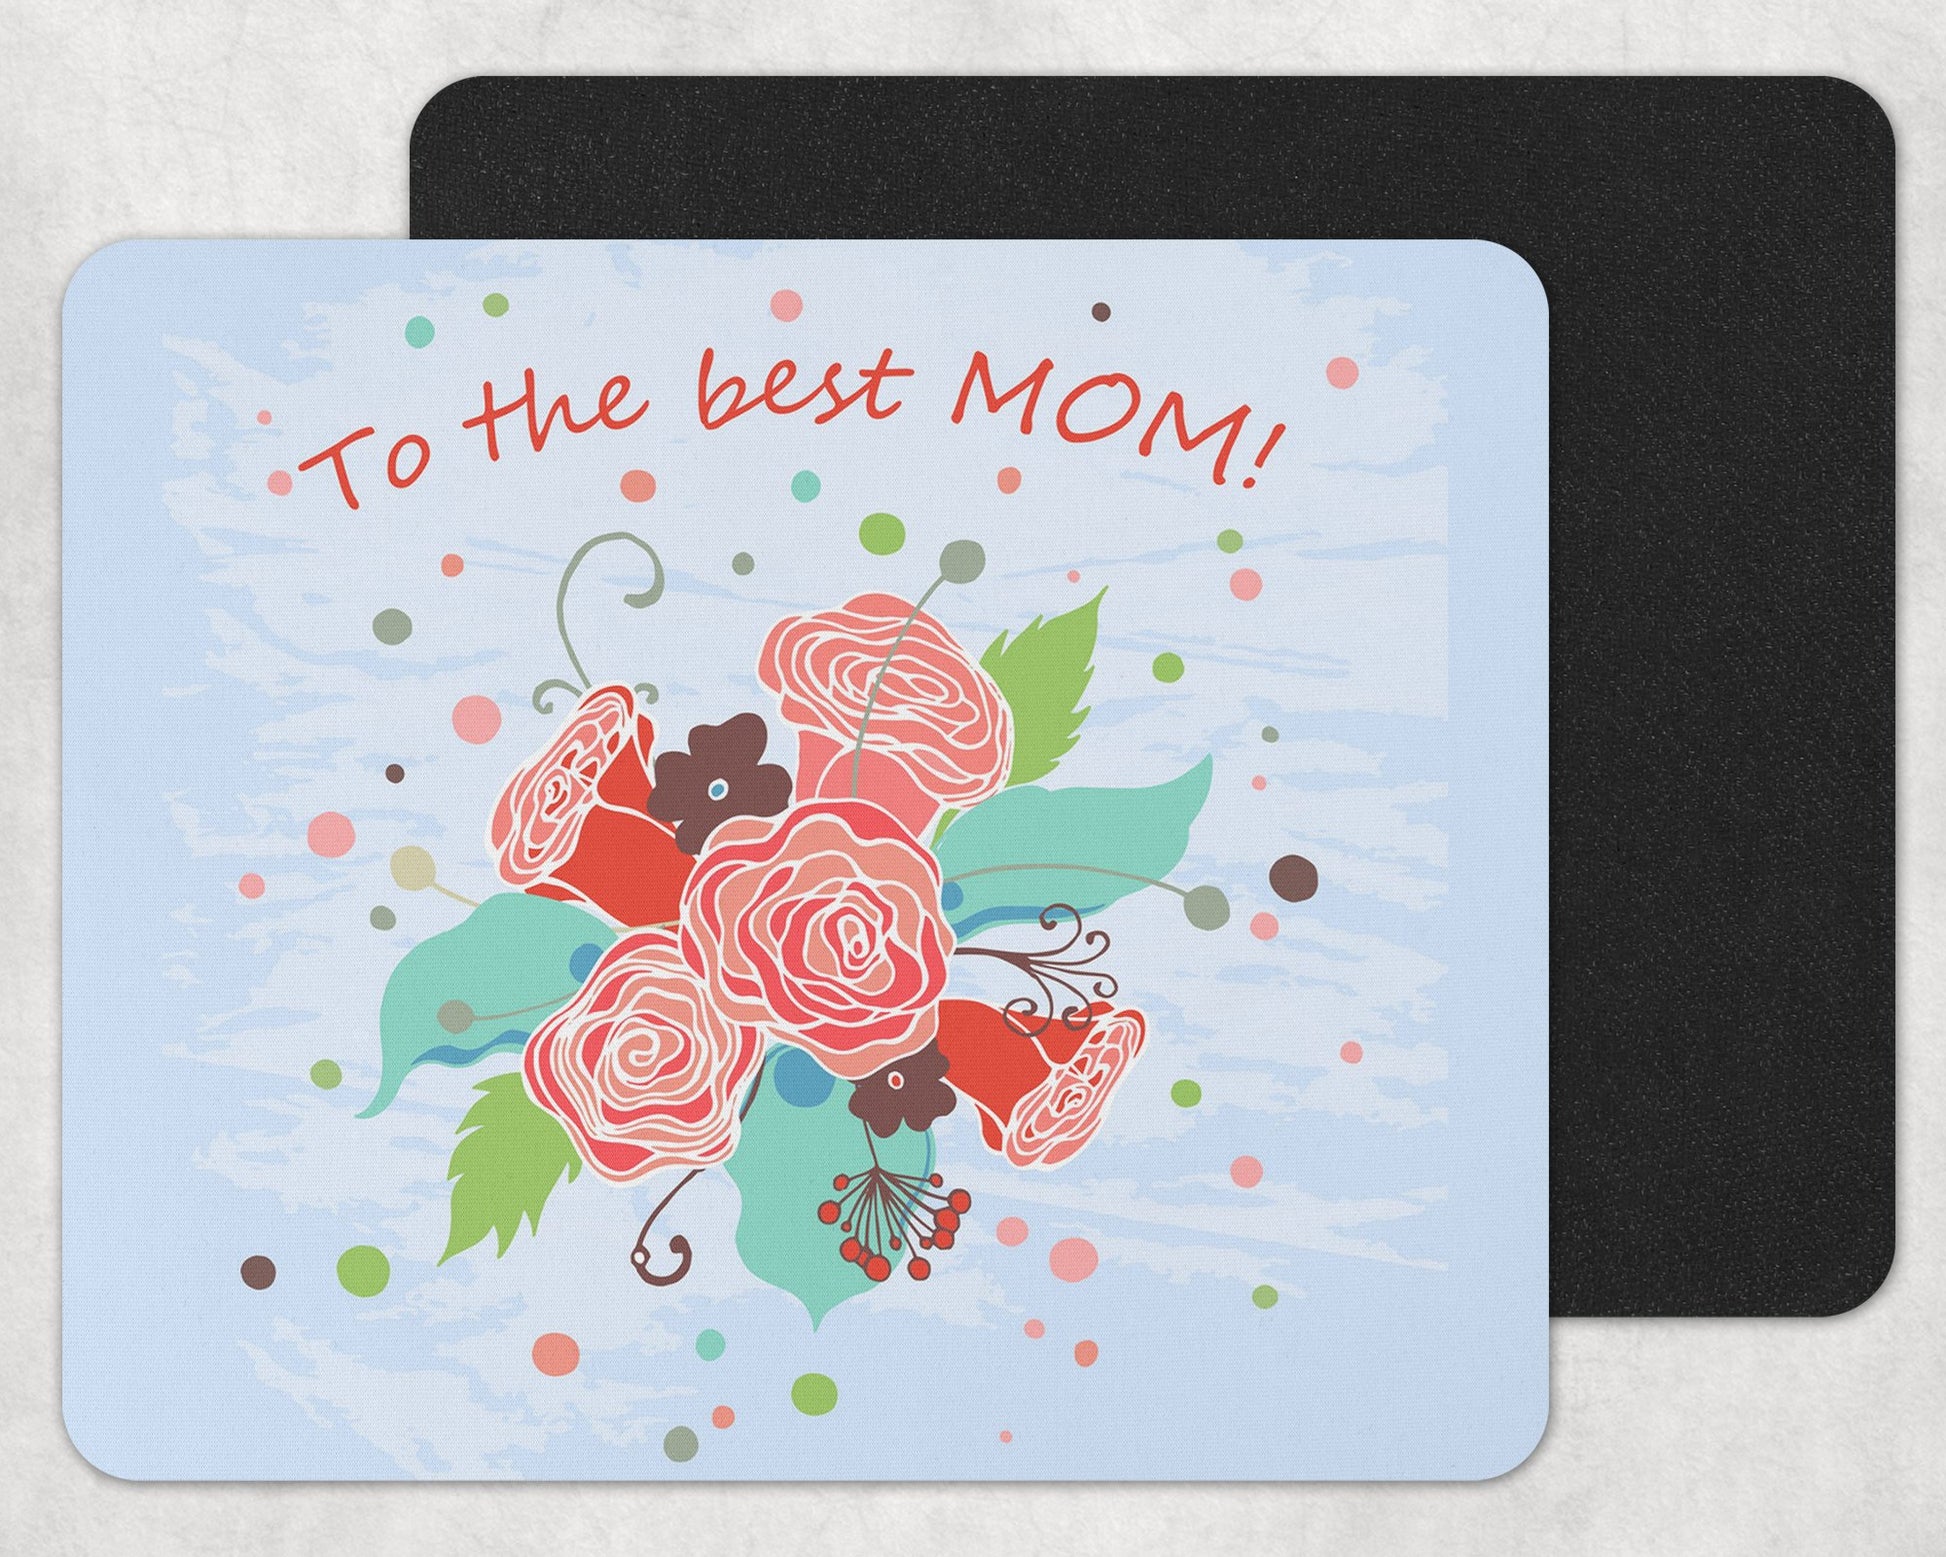 To The Best Mom Mousepad